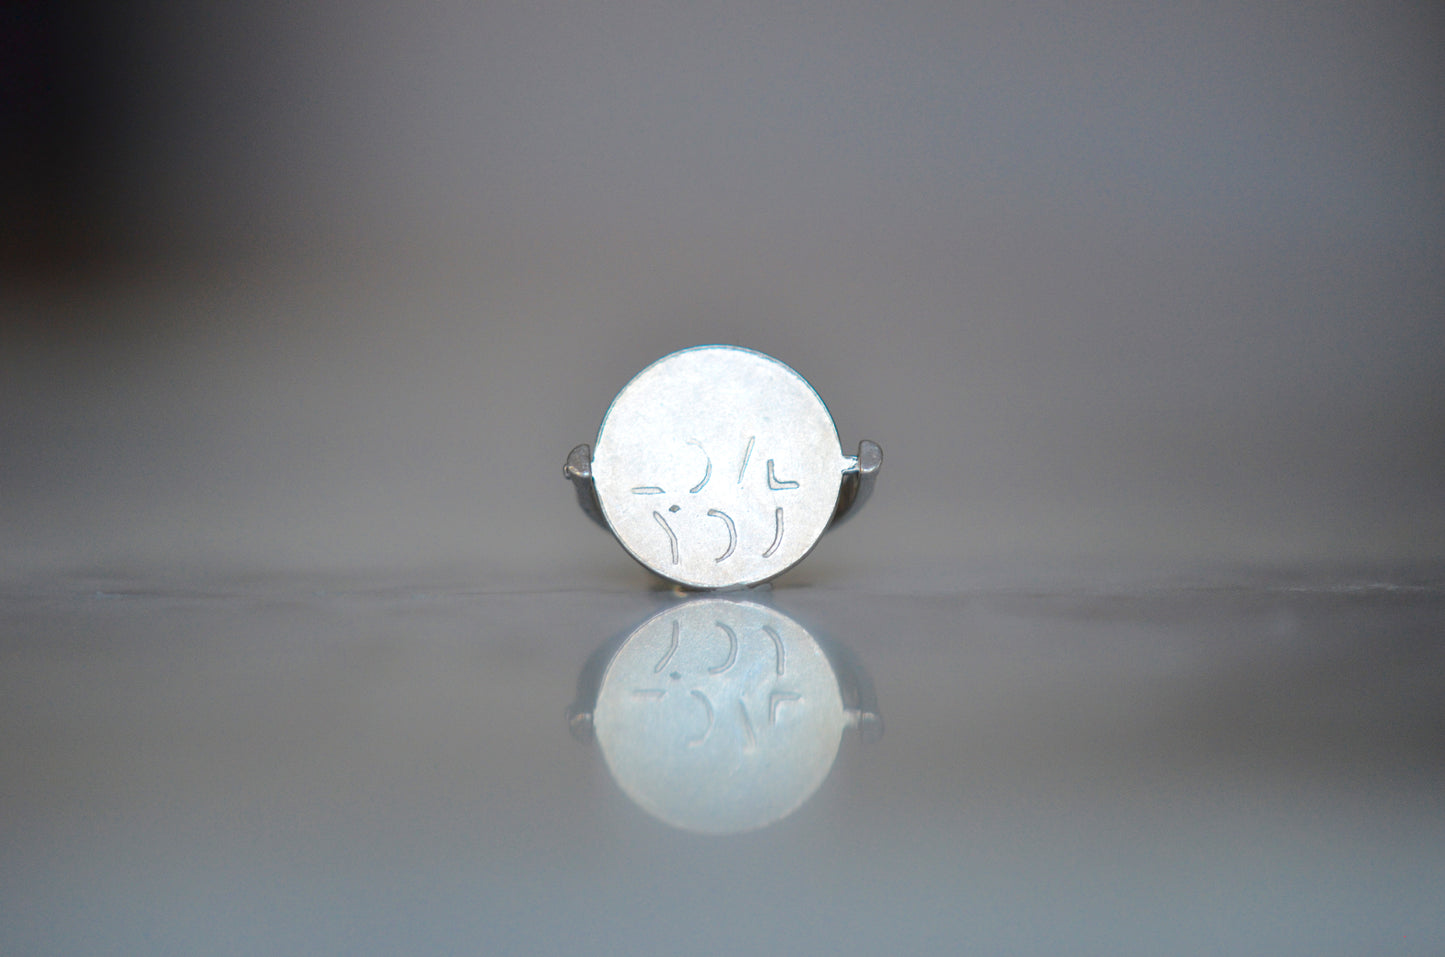 Small Silver "I Love You" Spinner